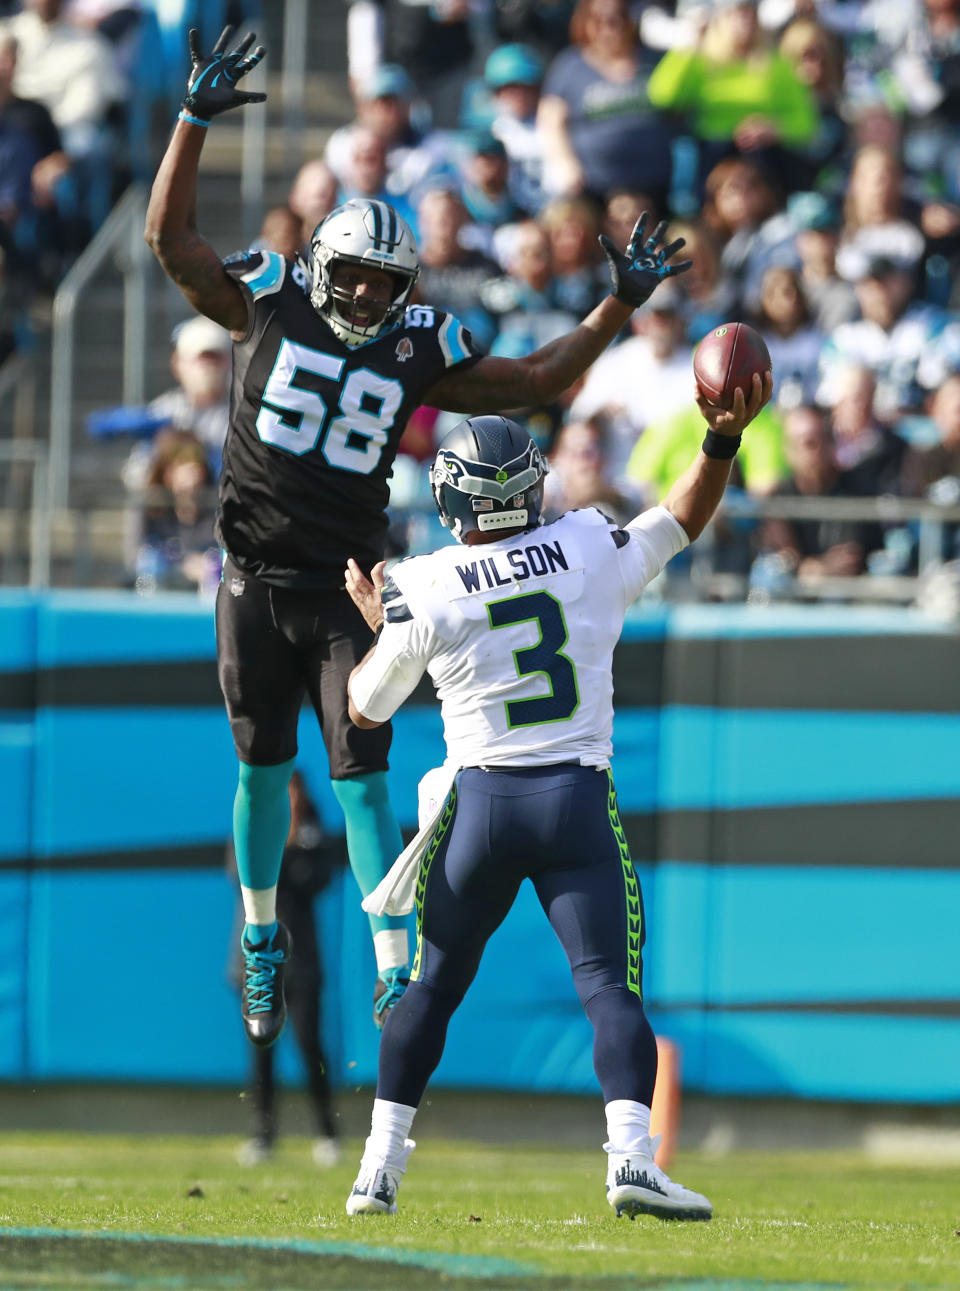 Carolina Panthers' Thomas Davis (58) jumps high as Seattle Seahawks' Russell Wilson (3) tries to pass during the first half of an NFL football game in Charlotte, N.C., Sunday, Nov. 25, 2018. (AP Photo/Jason E. Miczek)